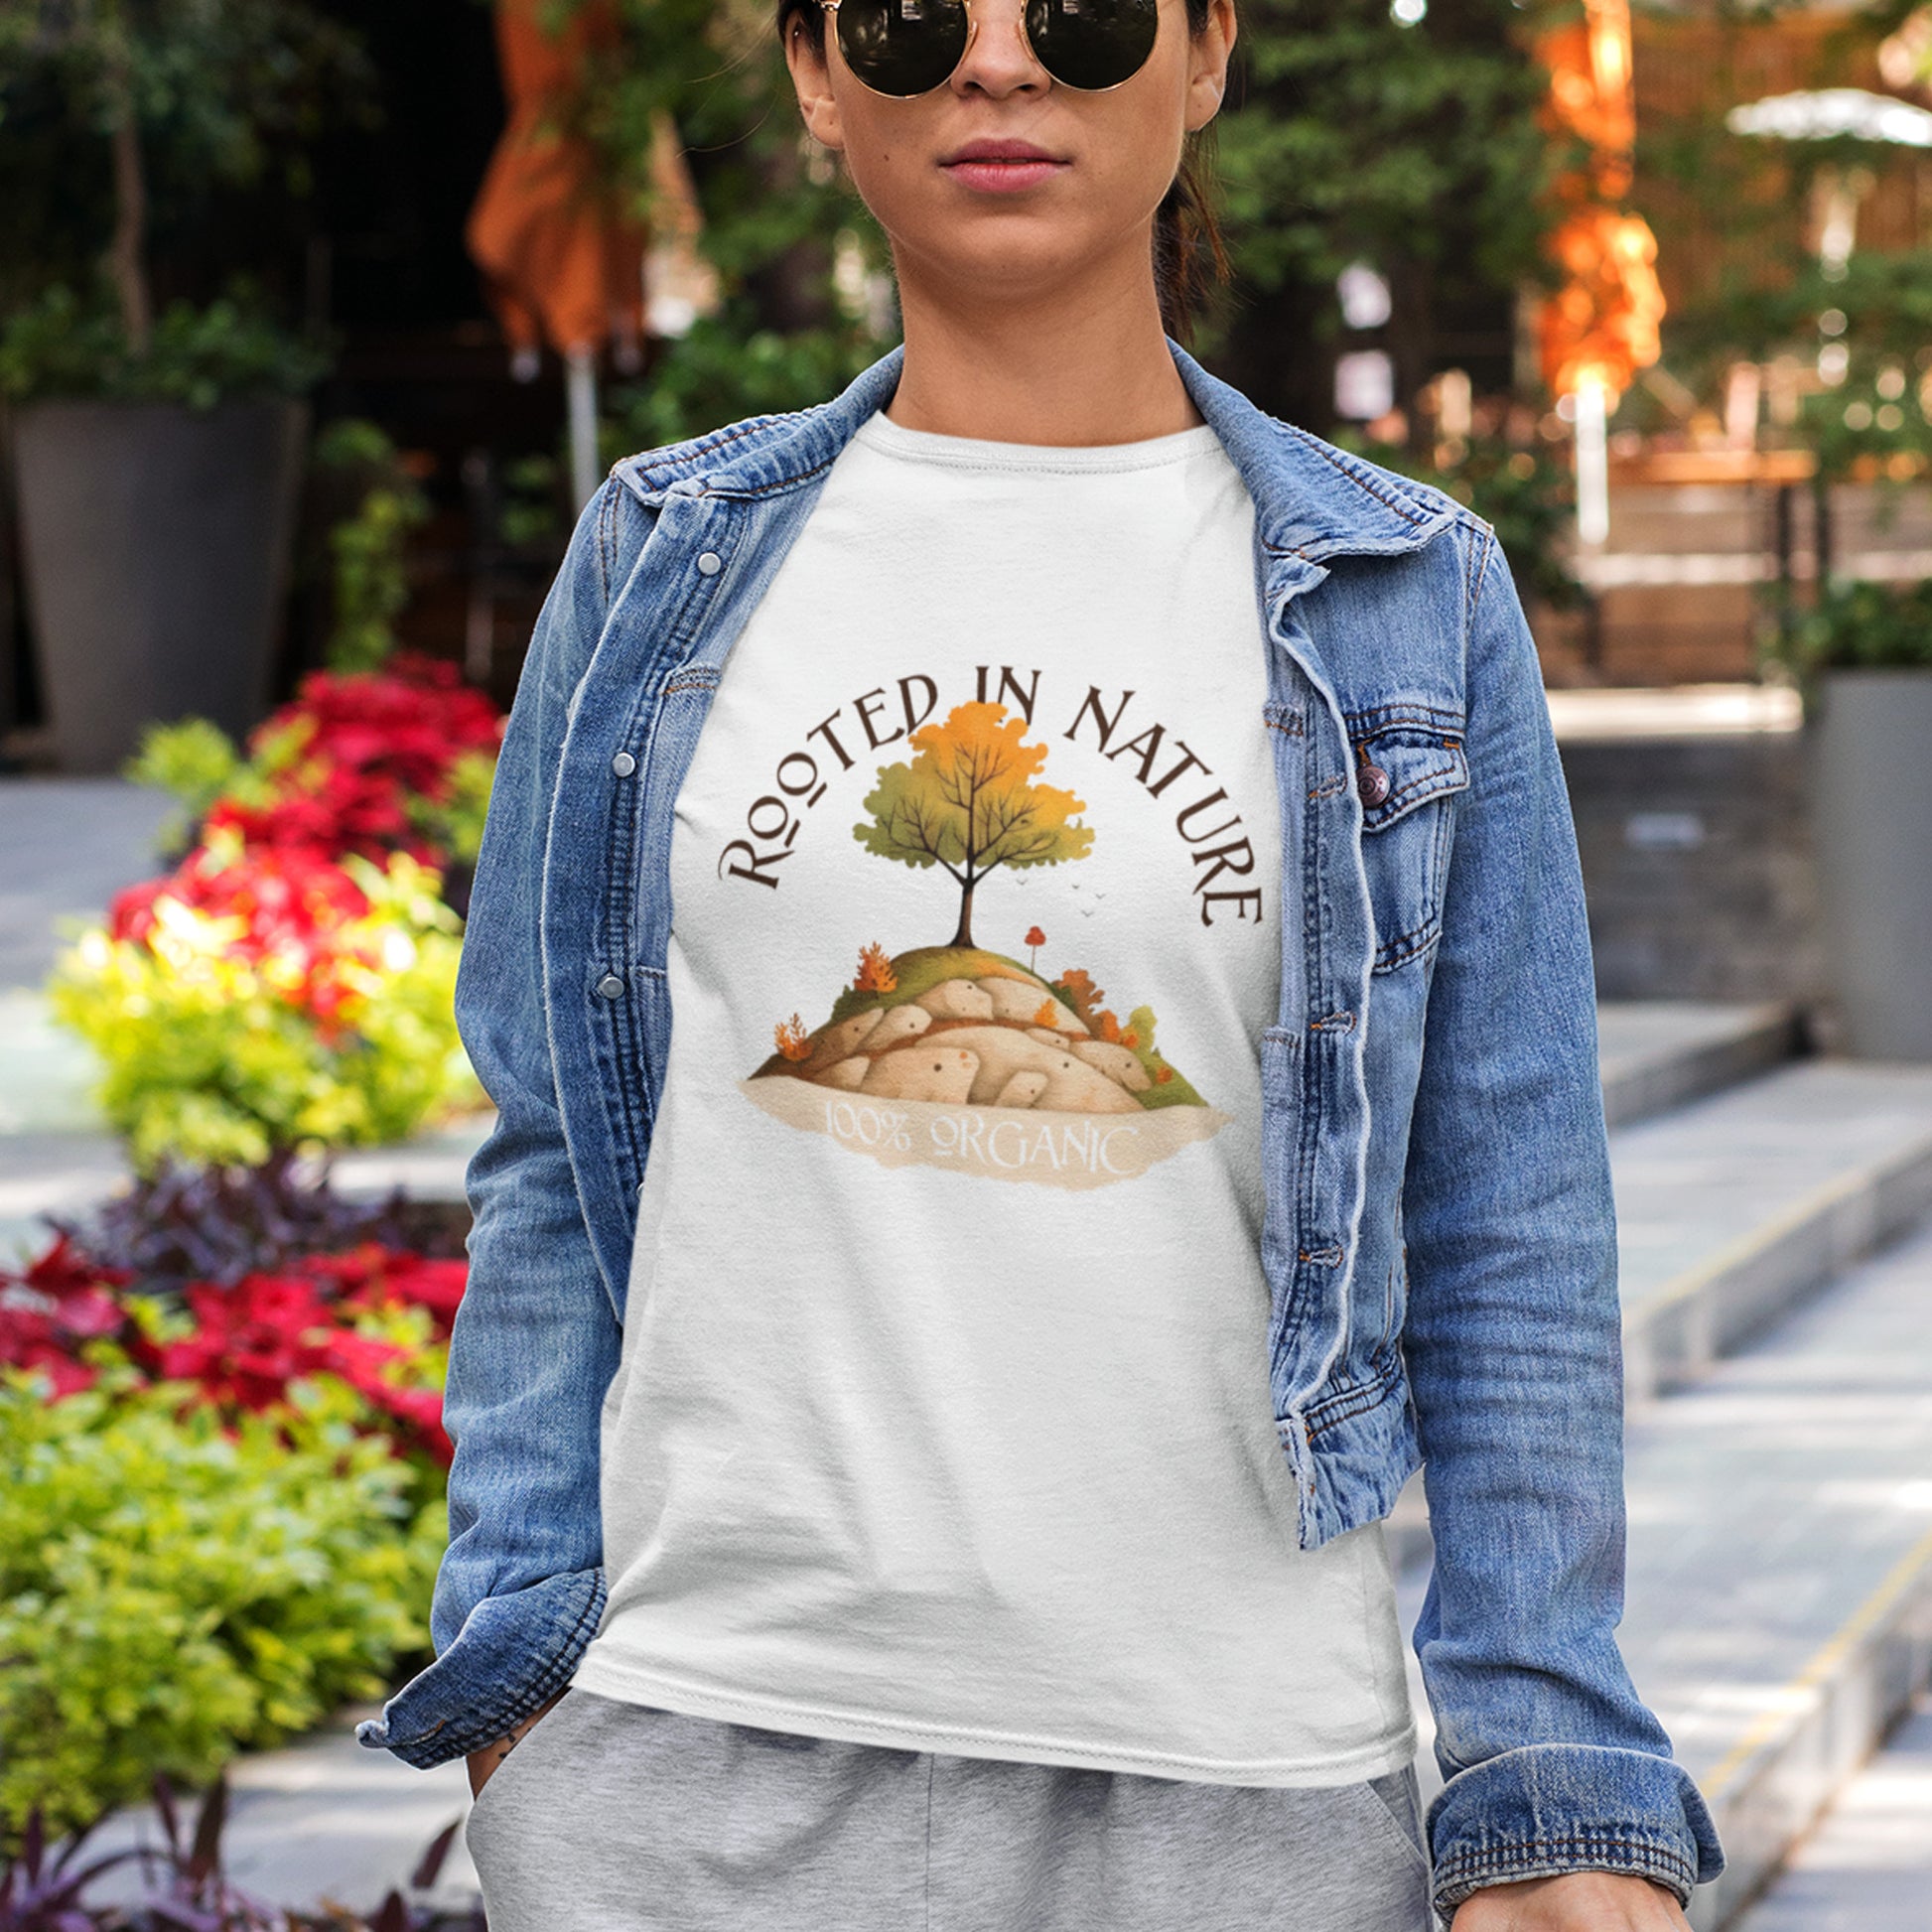 Female Model wearing Rooted in Nature Unisex organic cotton t-shirt- in white